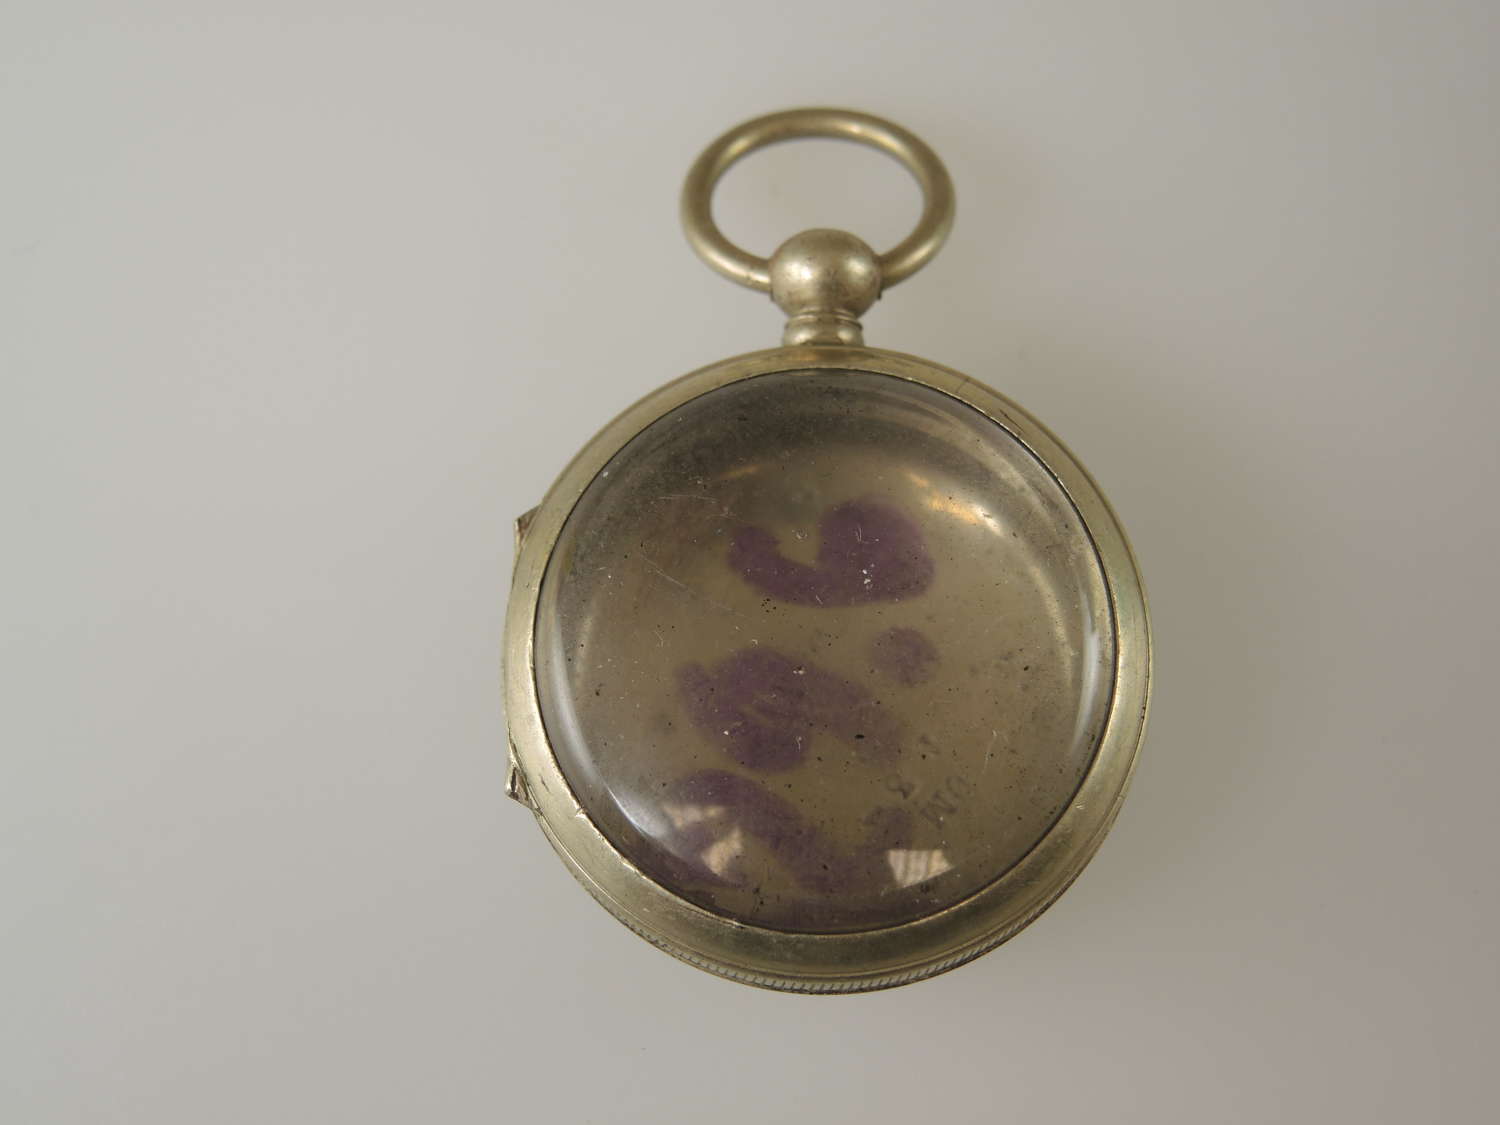 Gilt metal pocket watch case Suitable for pendant or locket also c1850